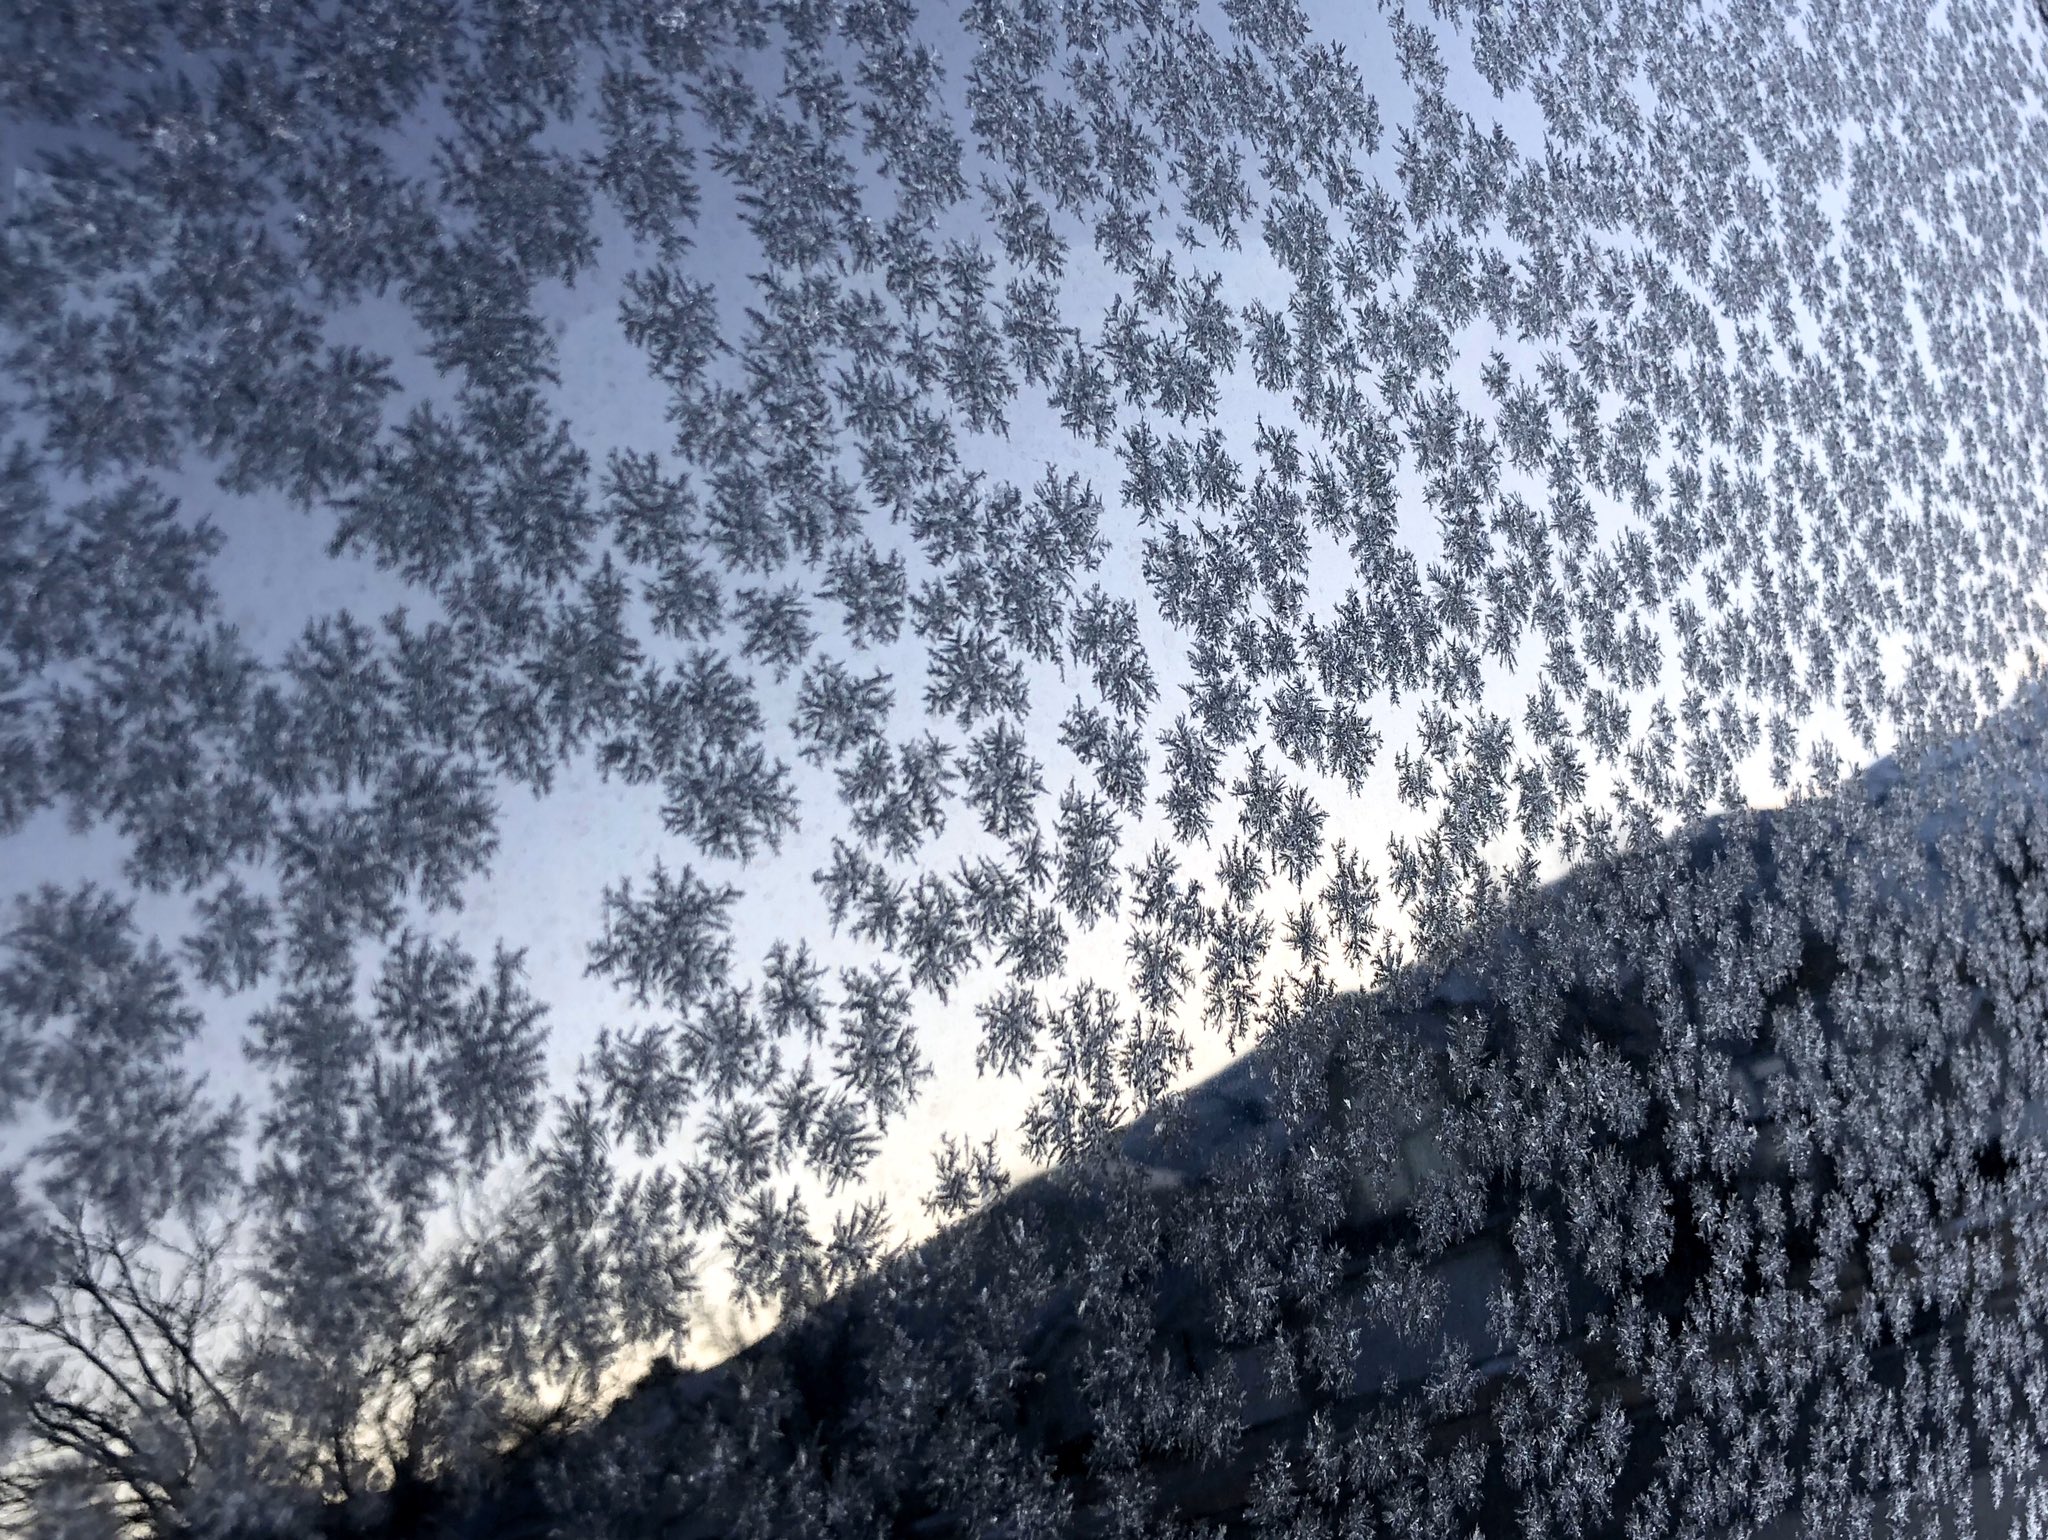 3rd Place Ice crystals on truck window with reflection of sunrise over Lone Peak Mtn, Draper, Utah by Brian Williams @brianwusa